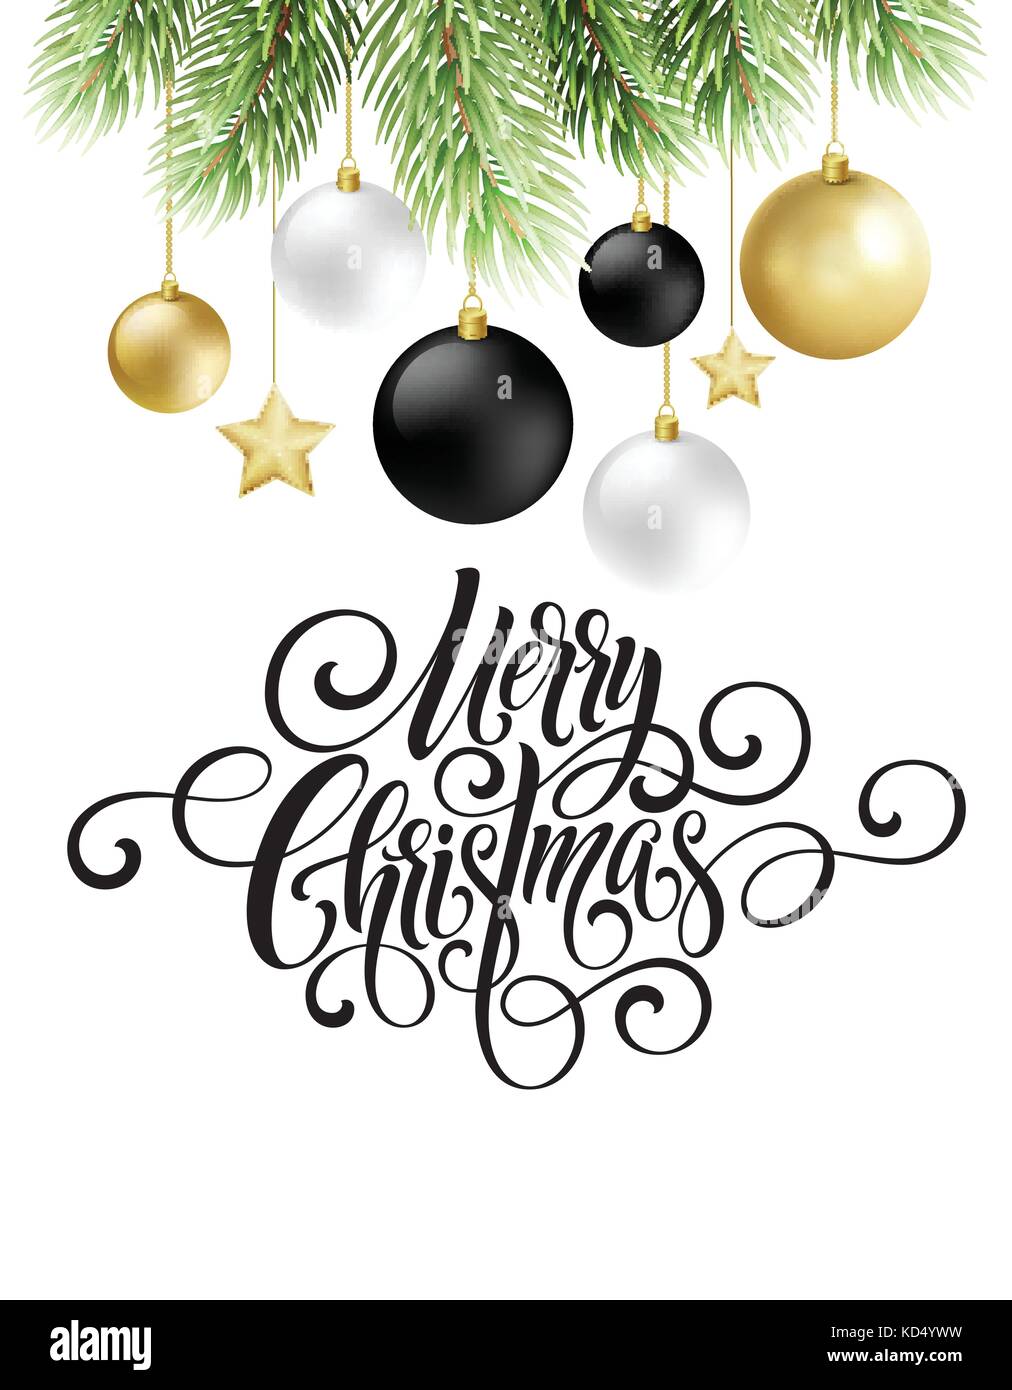 Merry Christmas handwriting script lettering. Greeting background with a Christmas tree and decorations. Vector illustration Stock Vector